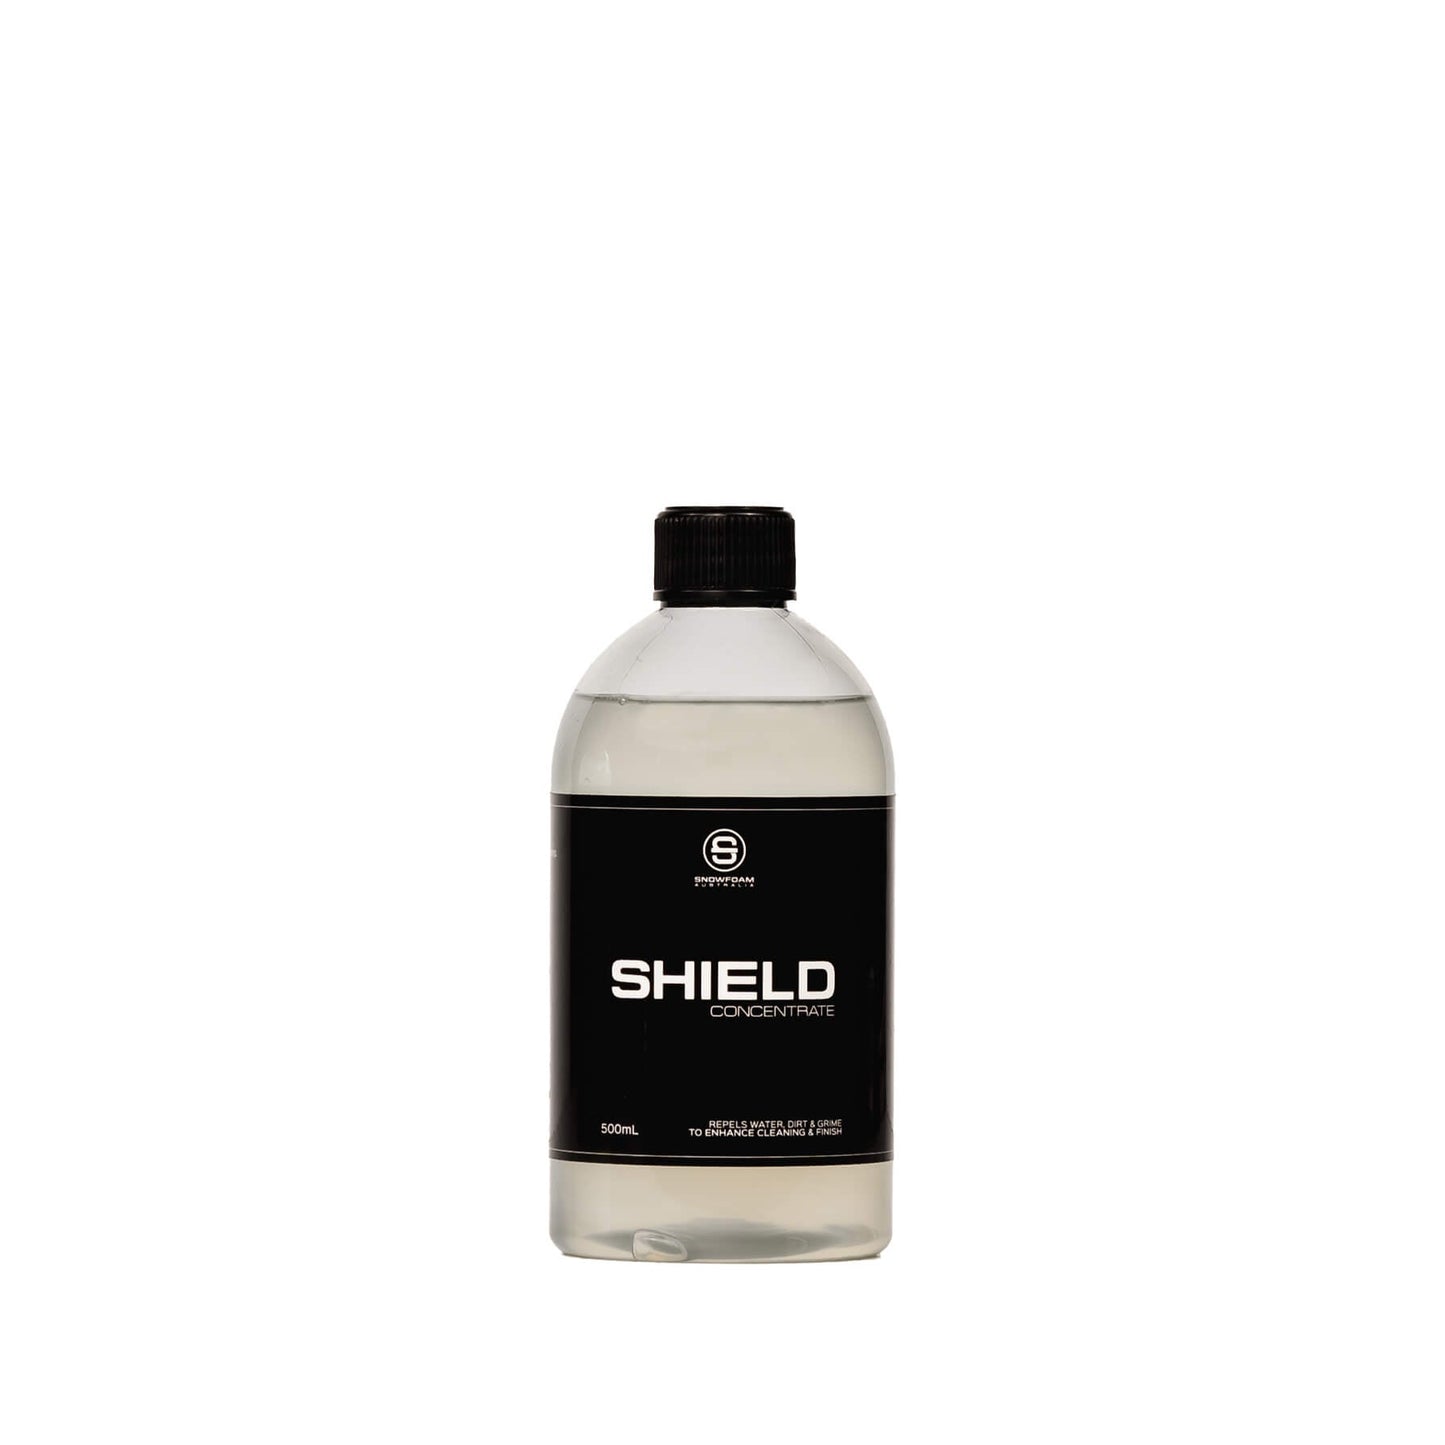 Shield Hydrophobic Concentrate